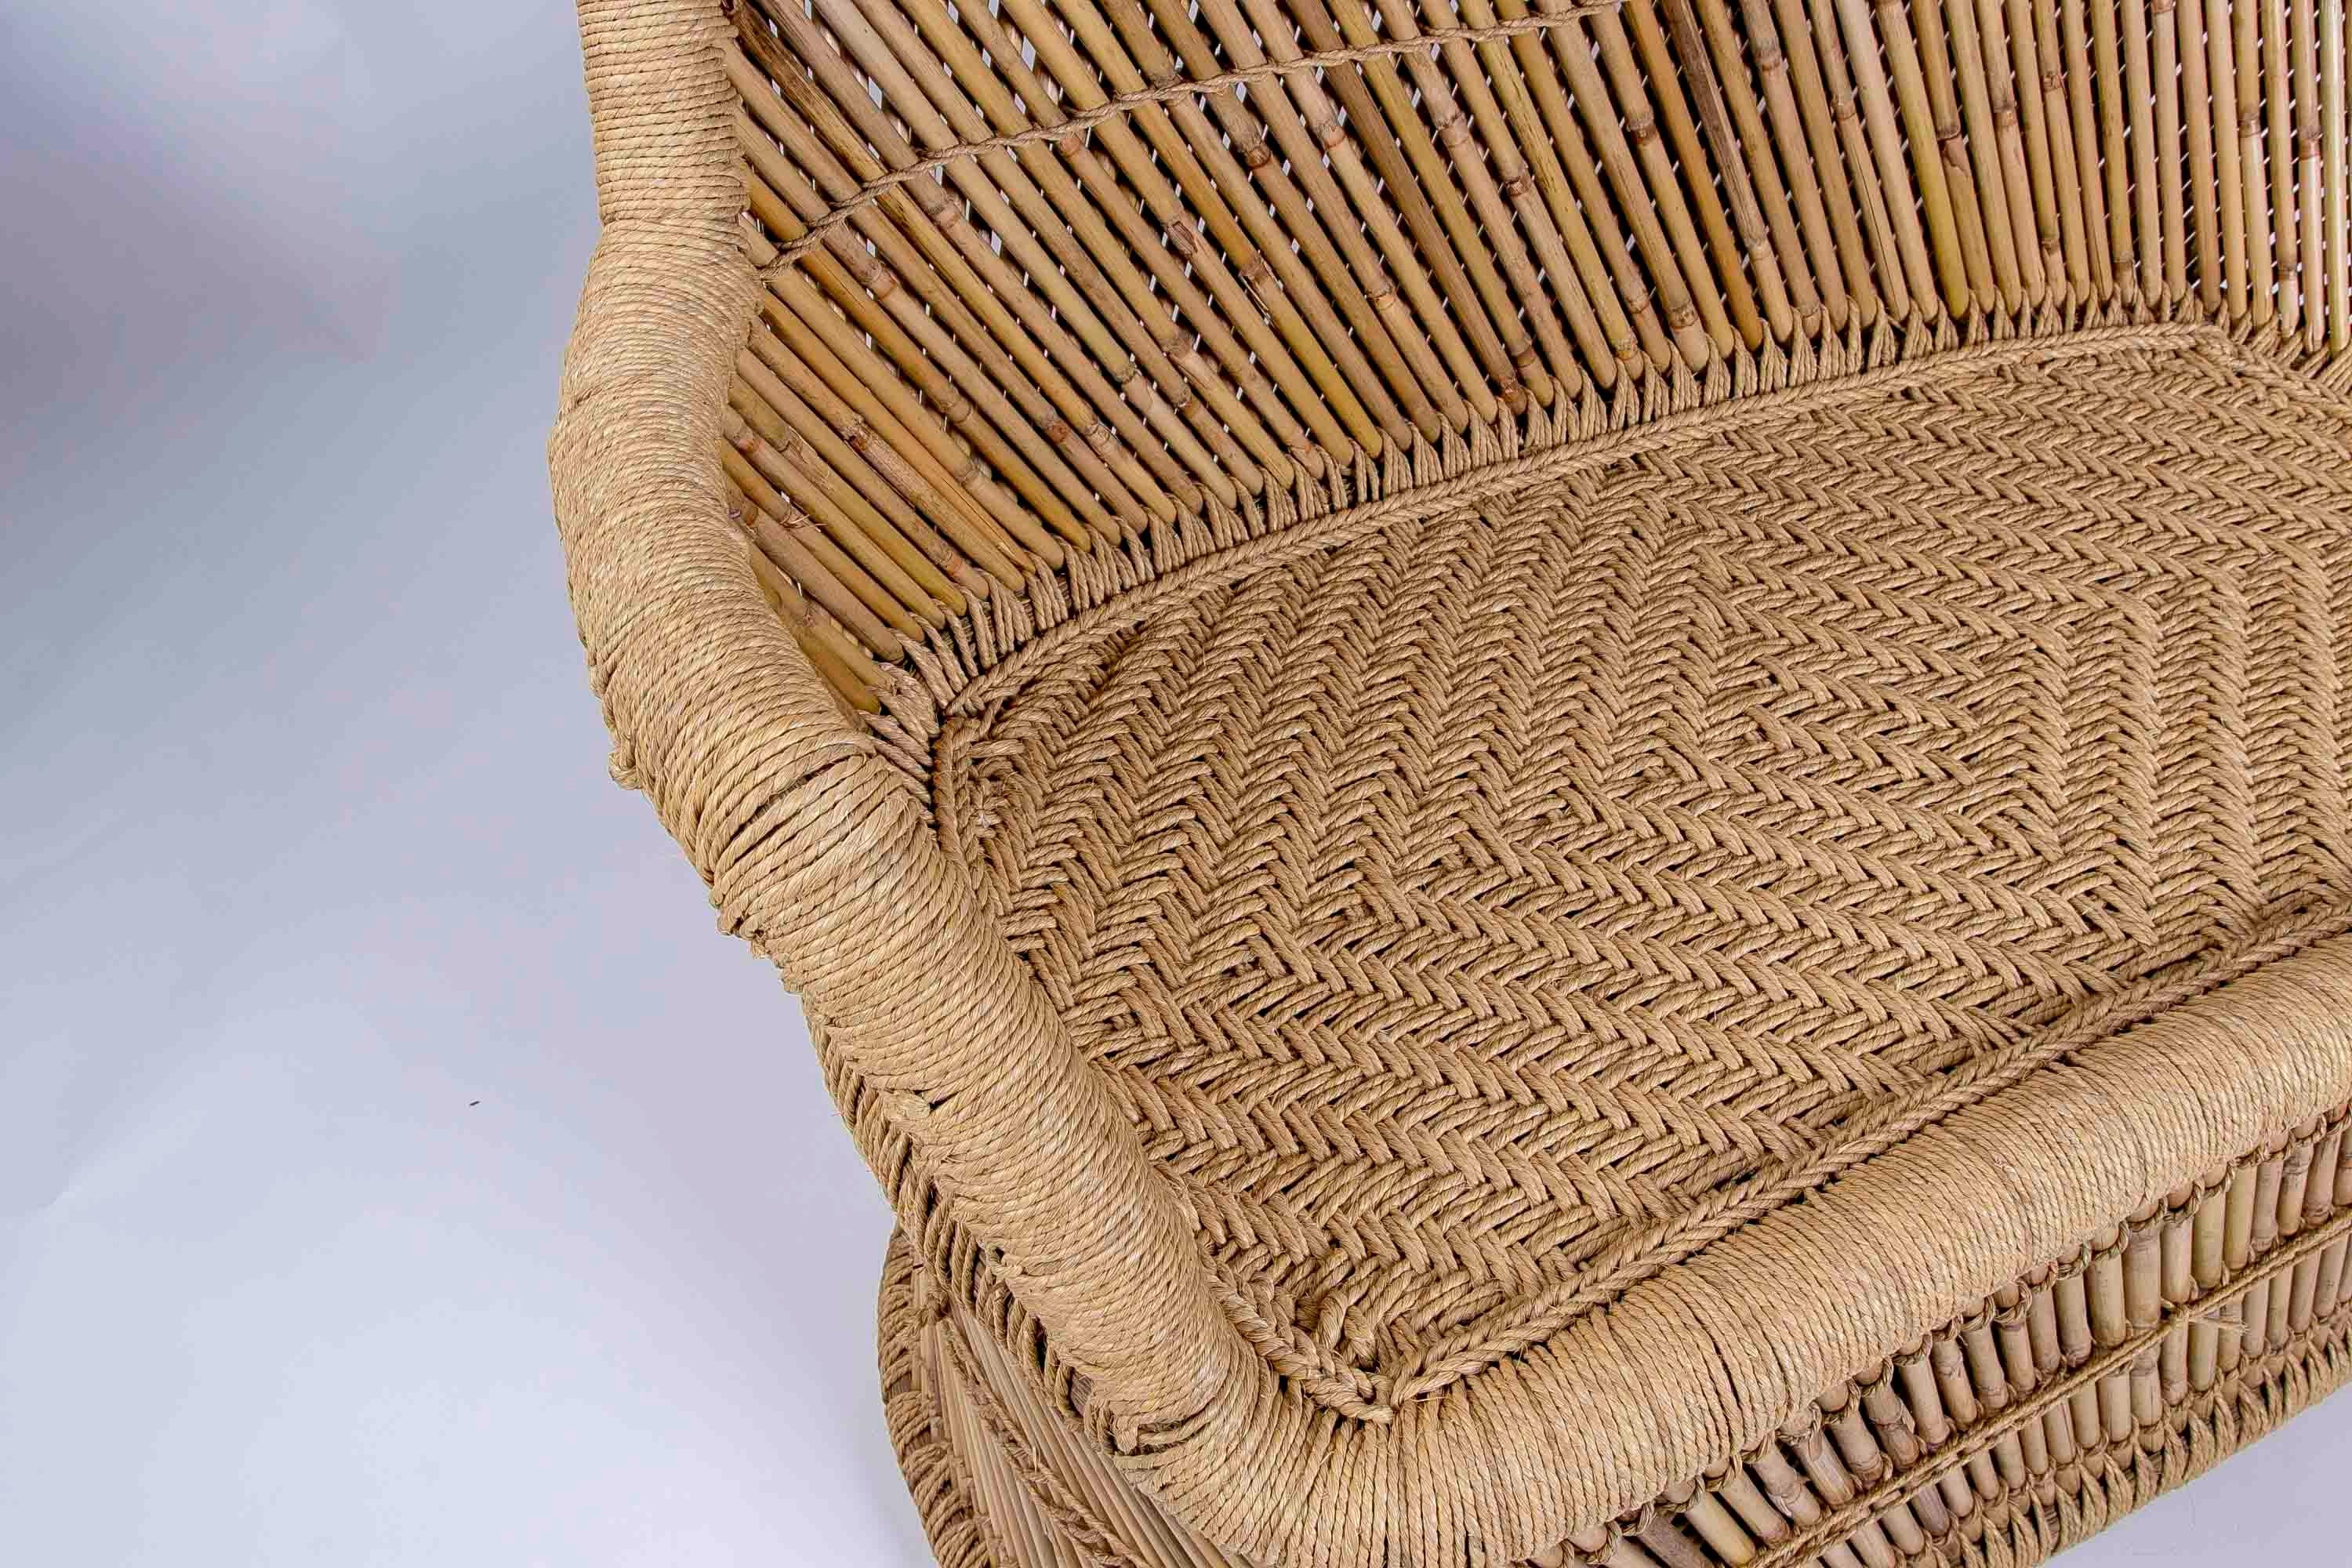  Bamboo and Rope Hand-Stiched  Sofa For Sale 4